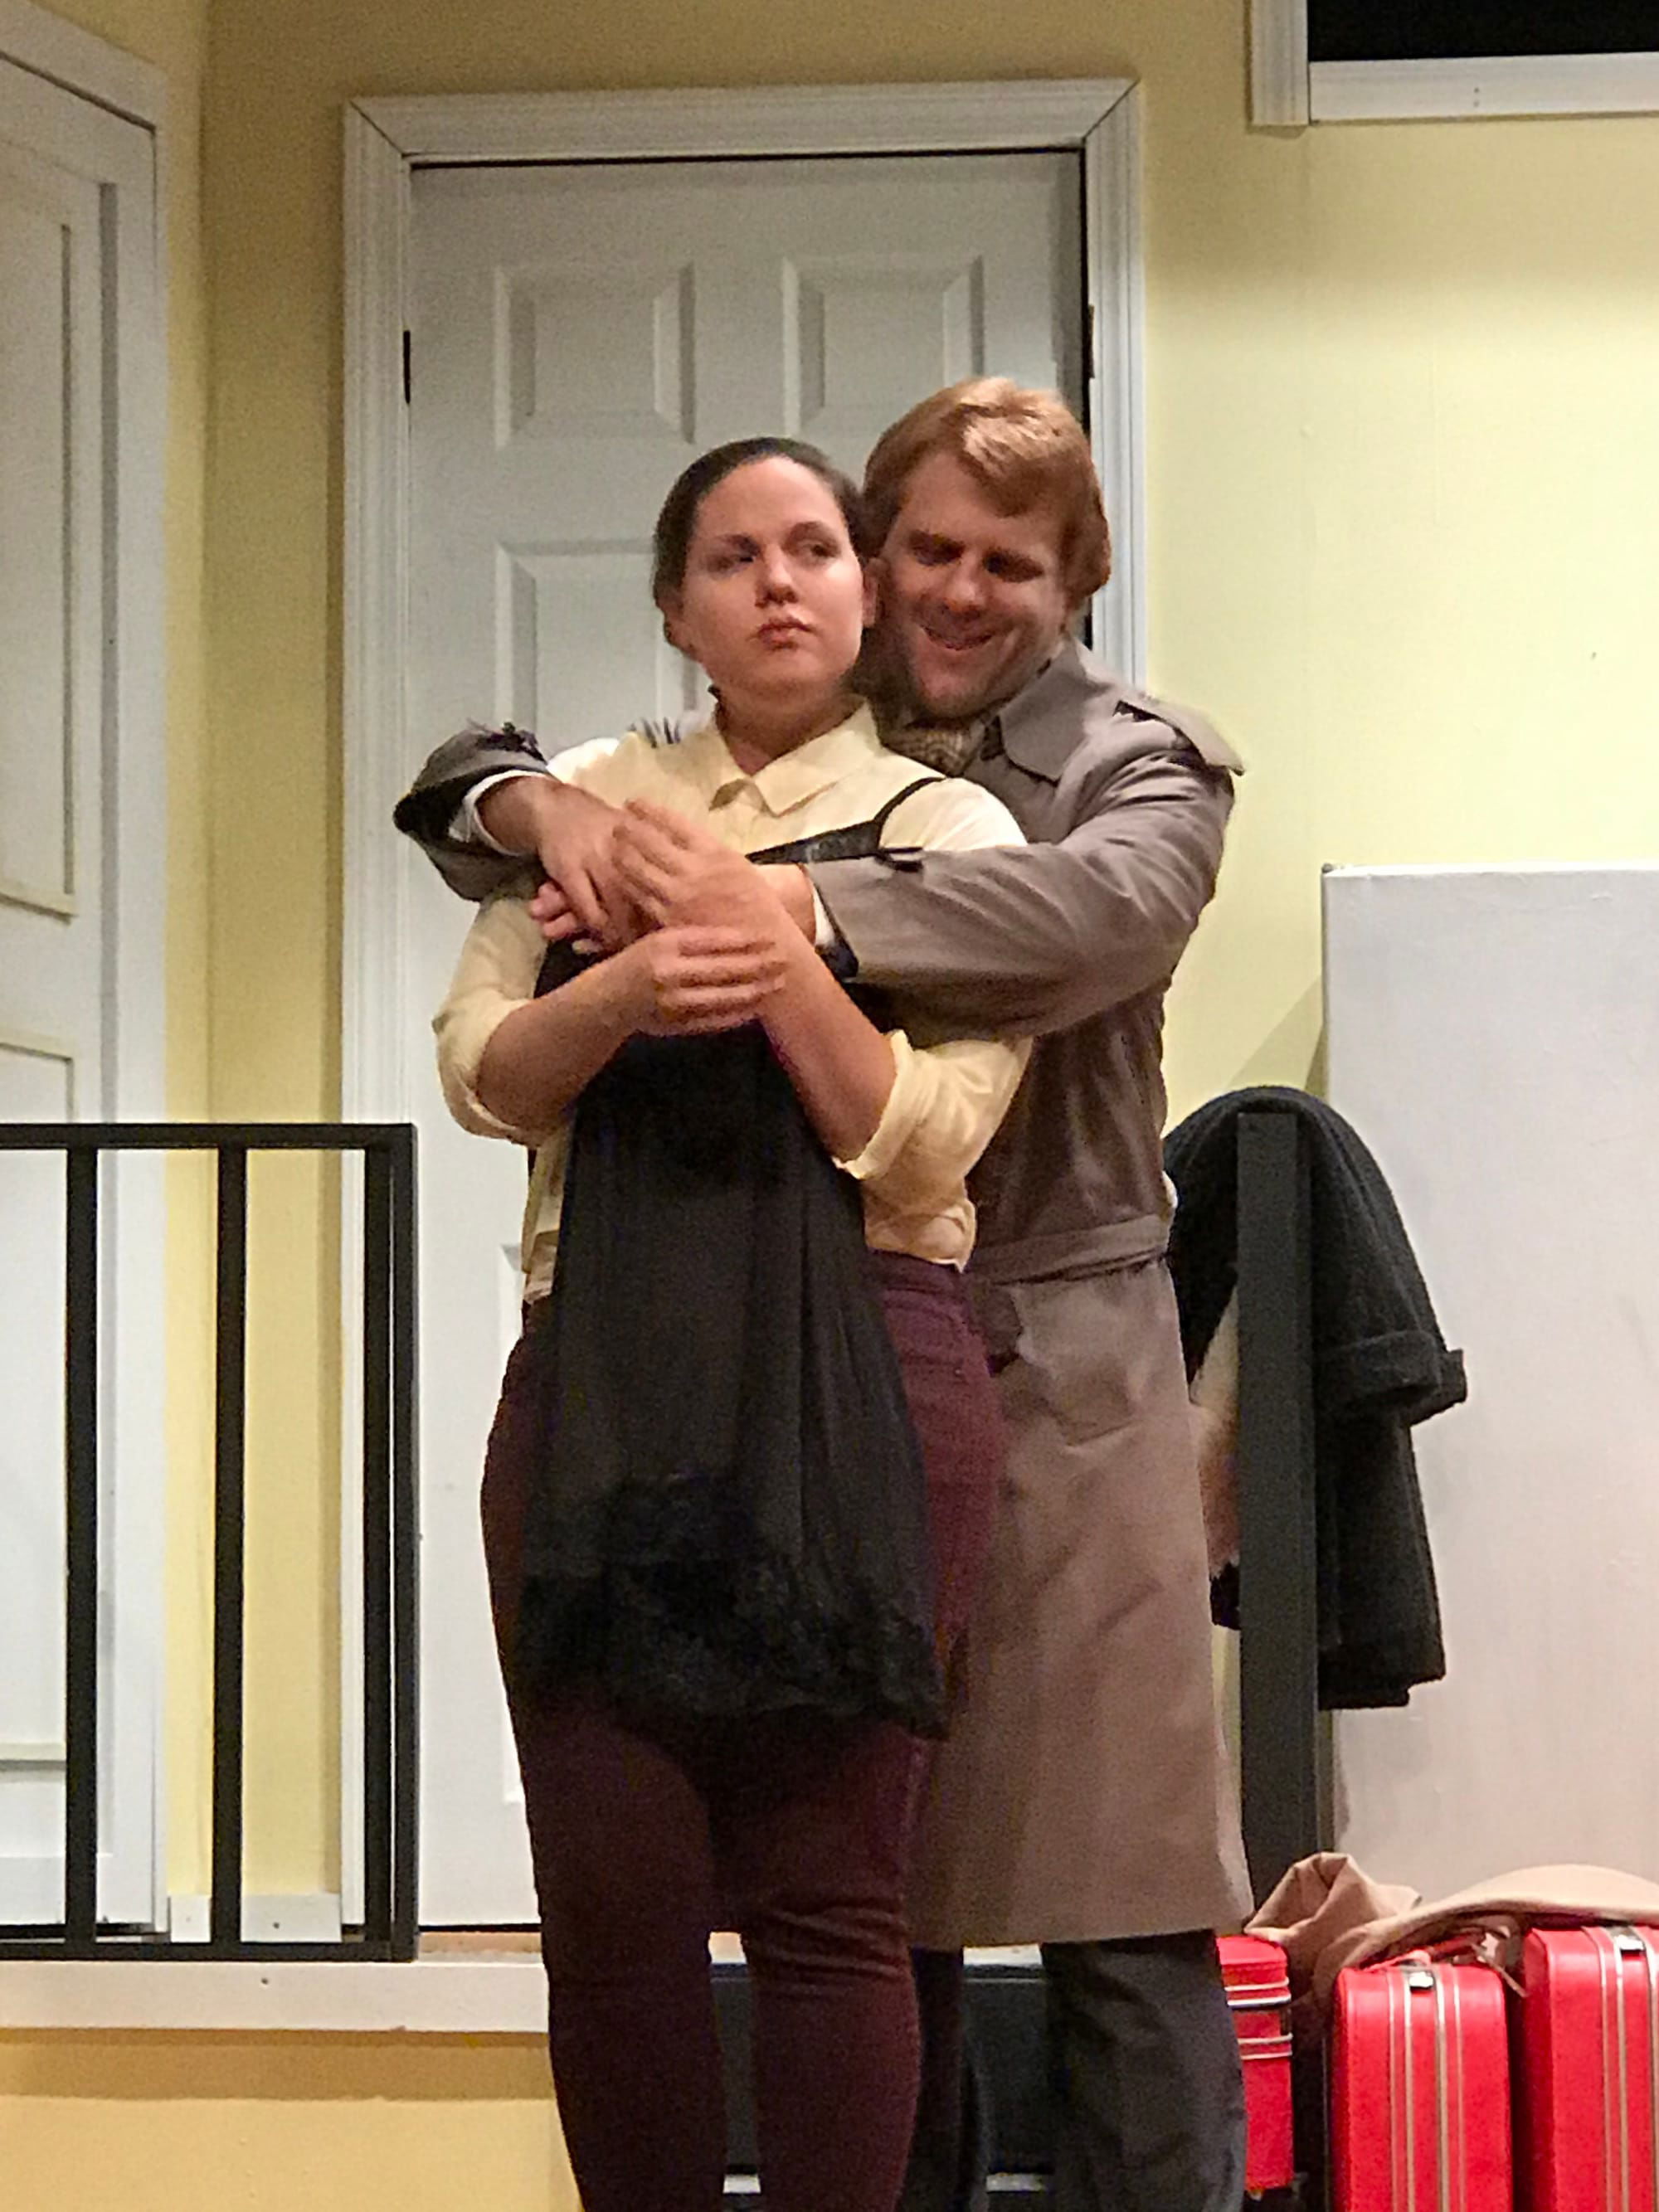 Gateway director explores love and marriage in Neil Simon’s “Barefoot in the Park”